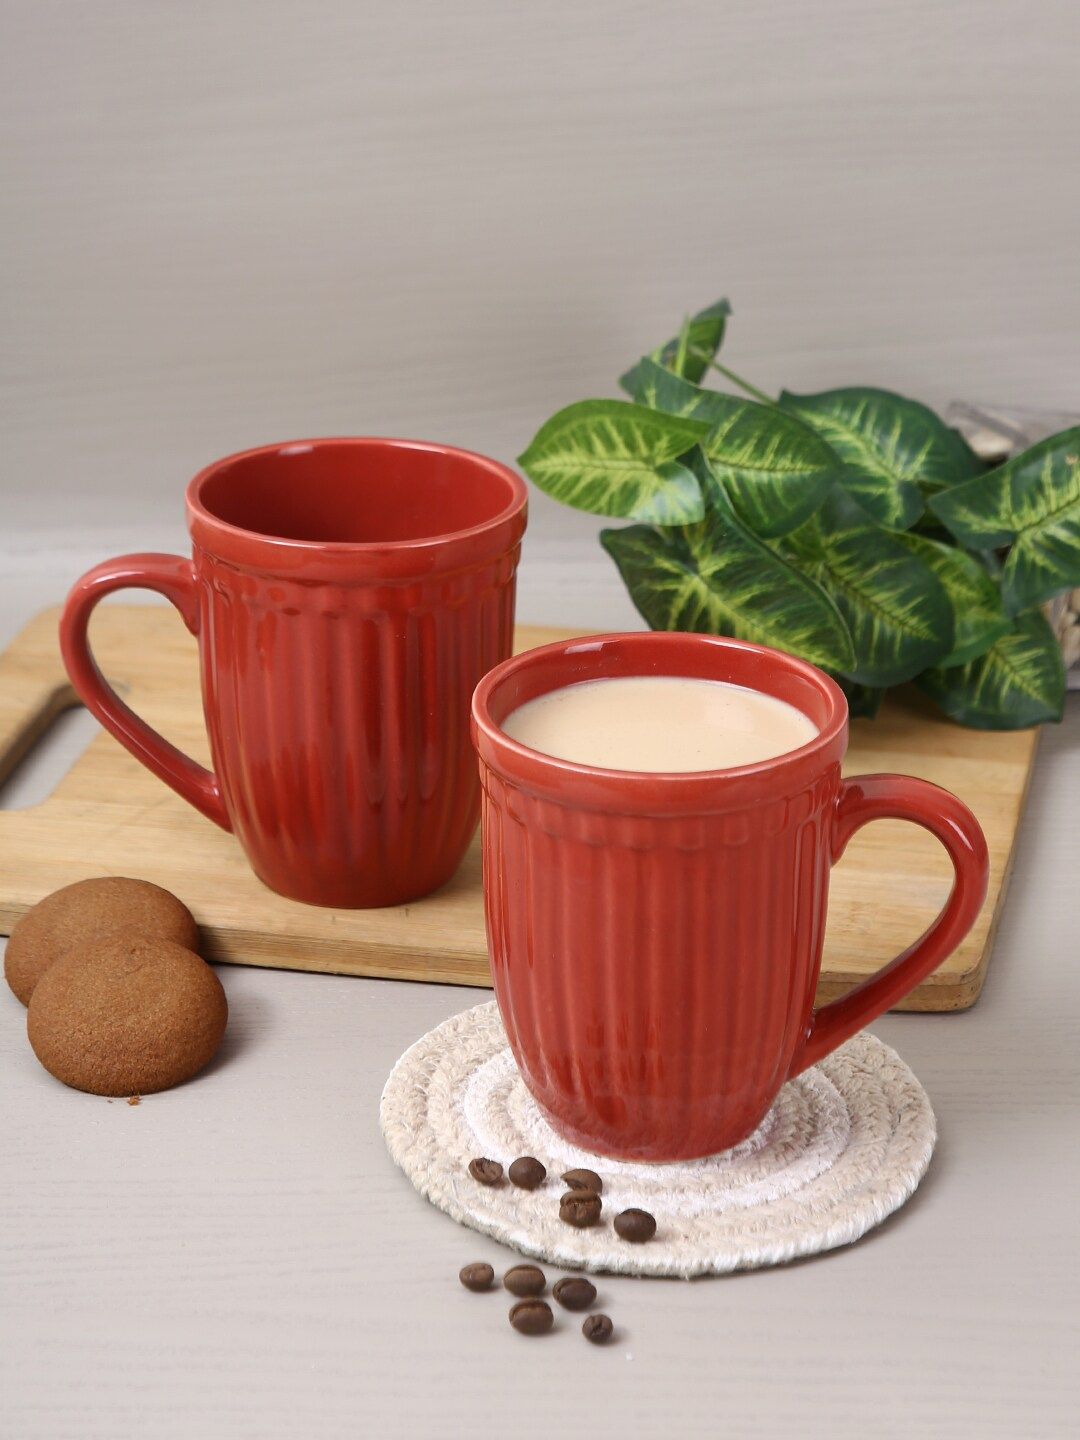 Aapno Rajasthan Set Of 2 Red Textured Ceramic Glossy Coffee Mugs Price in India